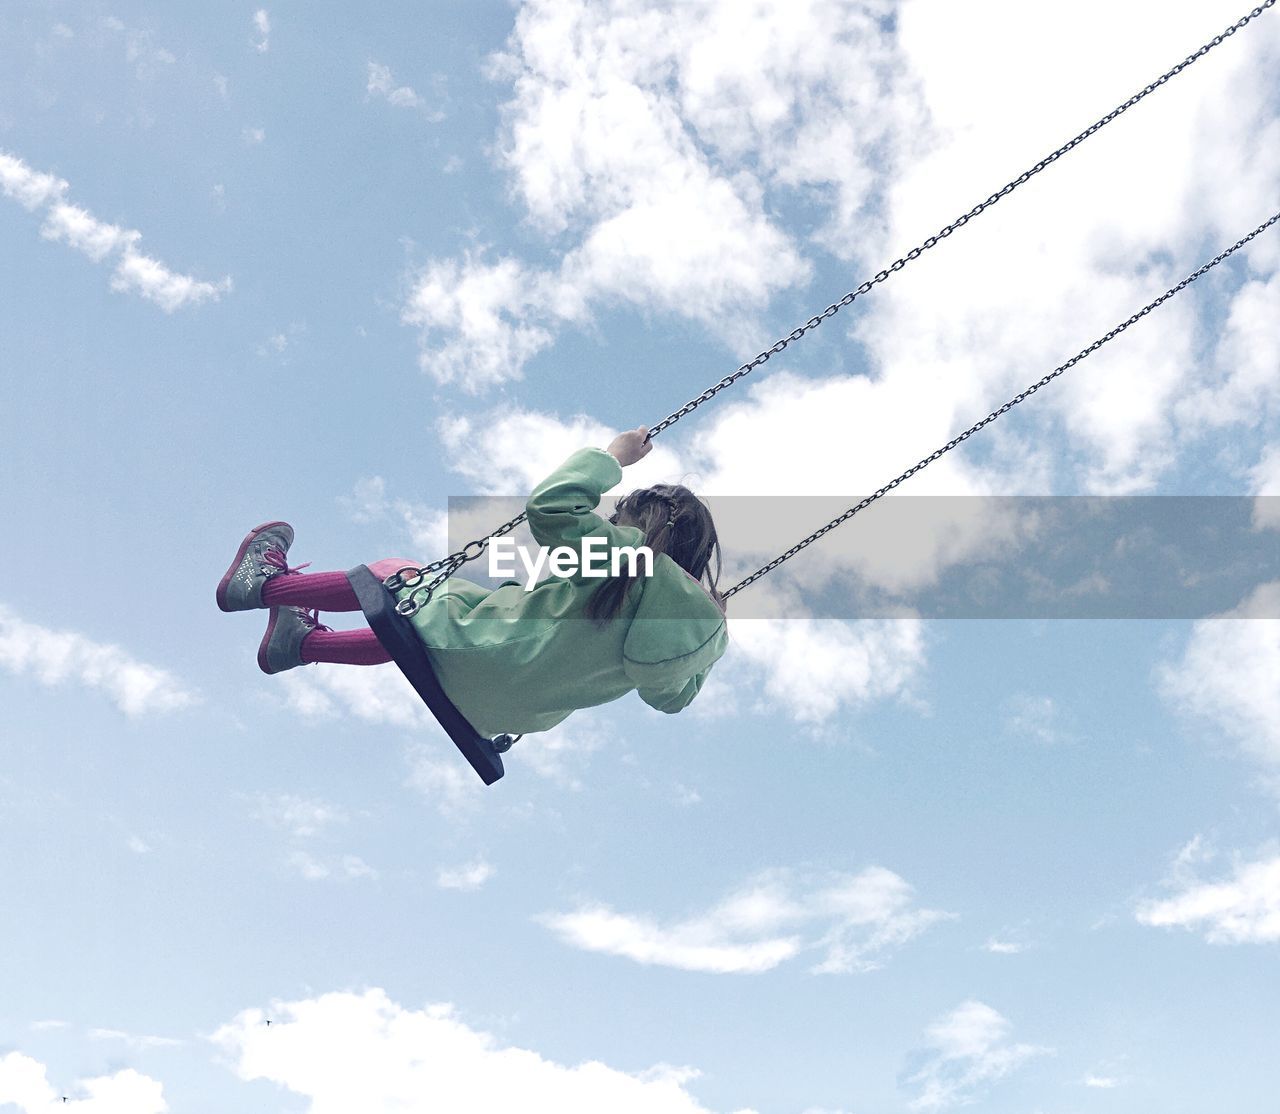 Low angle view of girl swinging on swing against cloudy sky